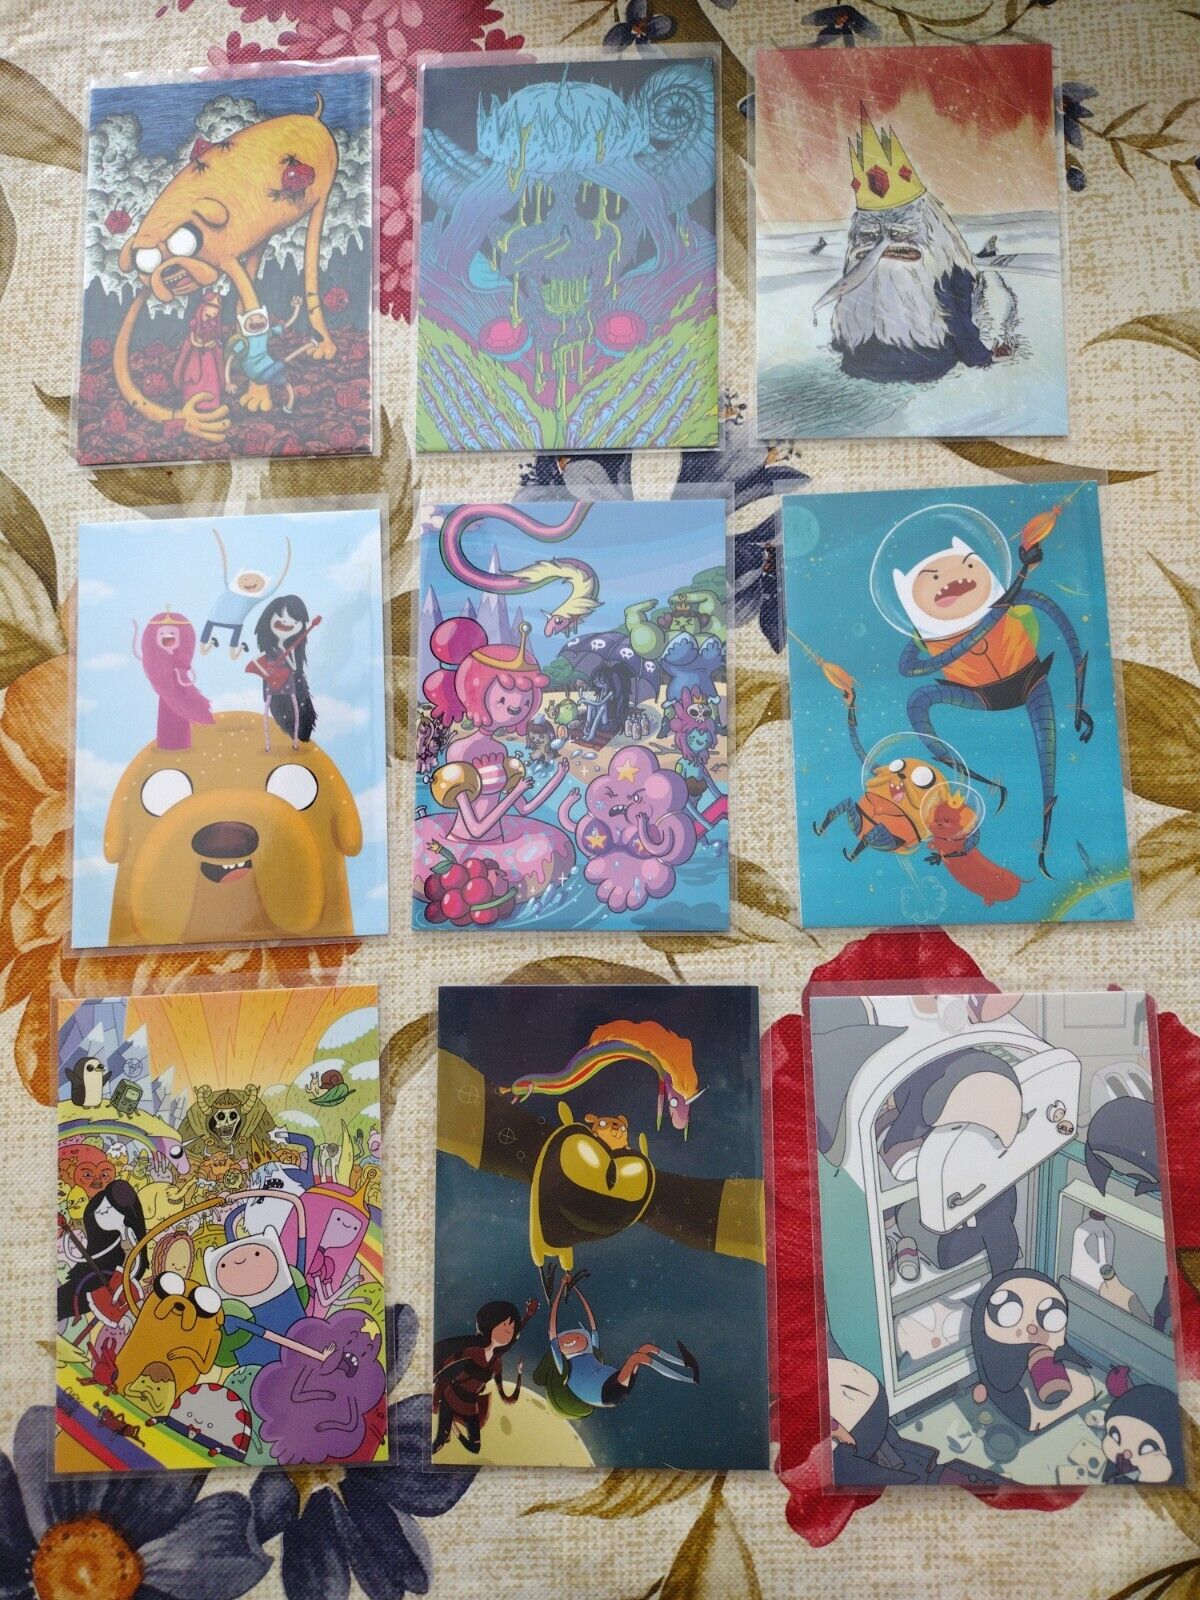 2014 Adventure Time Trading cards x9 (02, 05, 08, 11, 13, 14, 15, 16, 18)